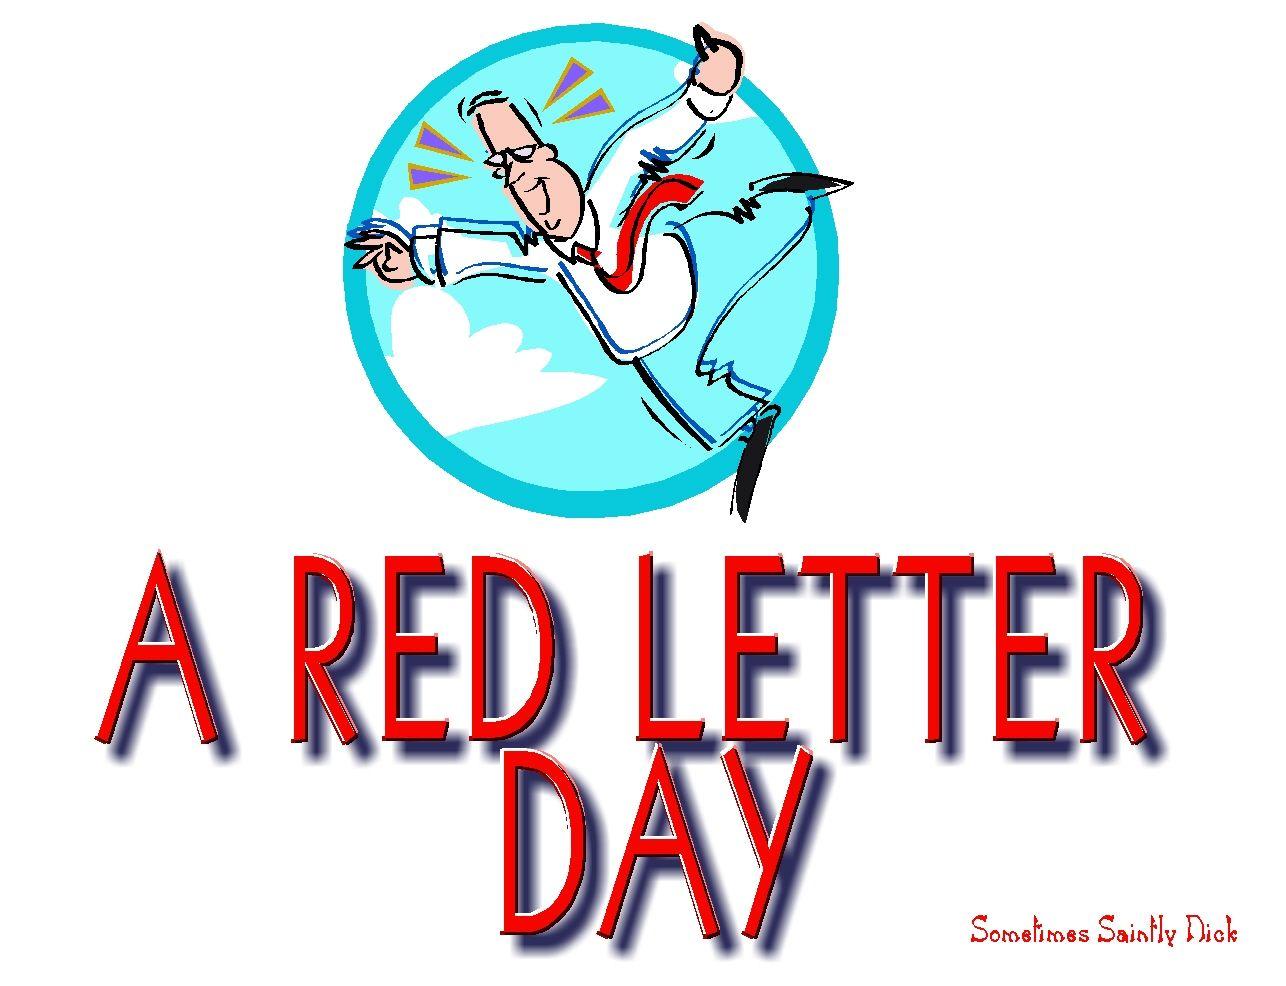 Red Letter Sports Logo - Nick's Daily Journal: Day Forty-four: A Red Letter Day